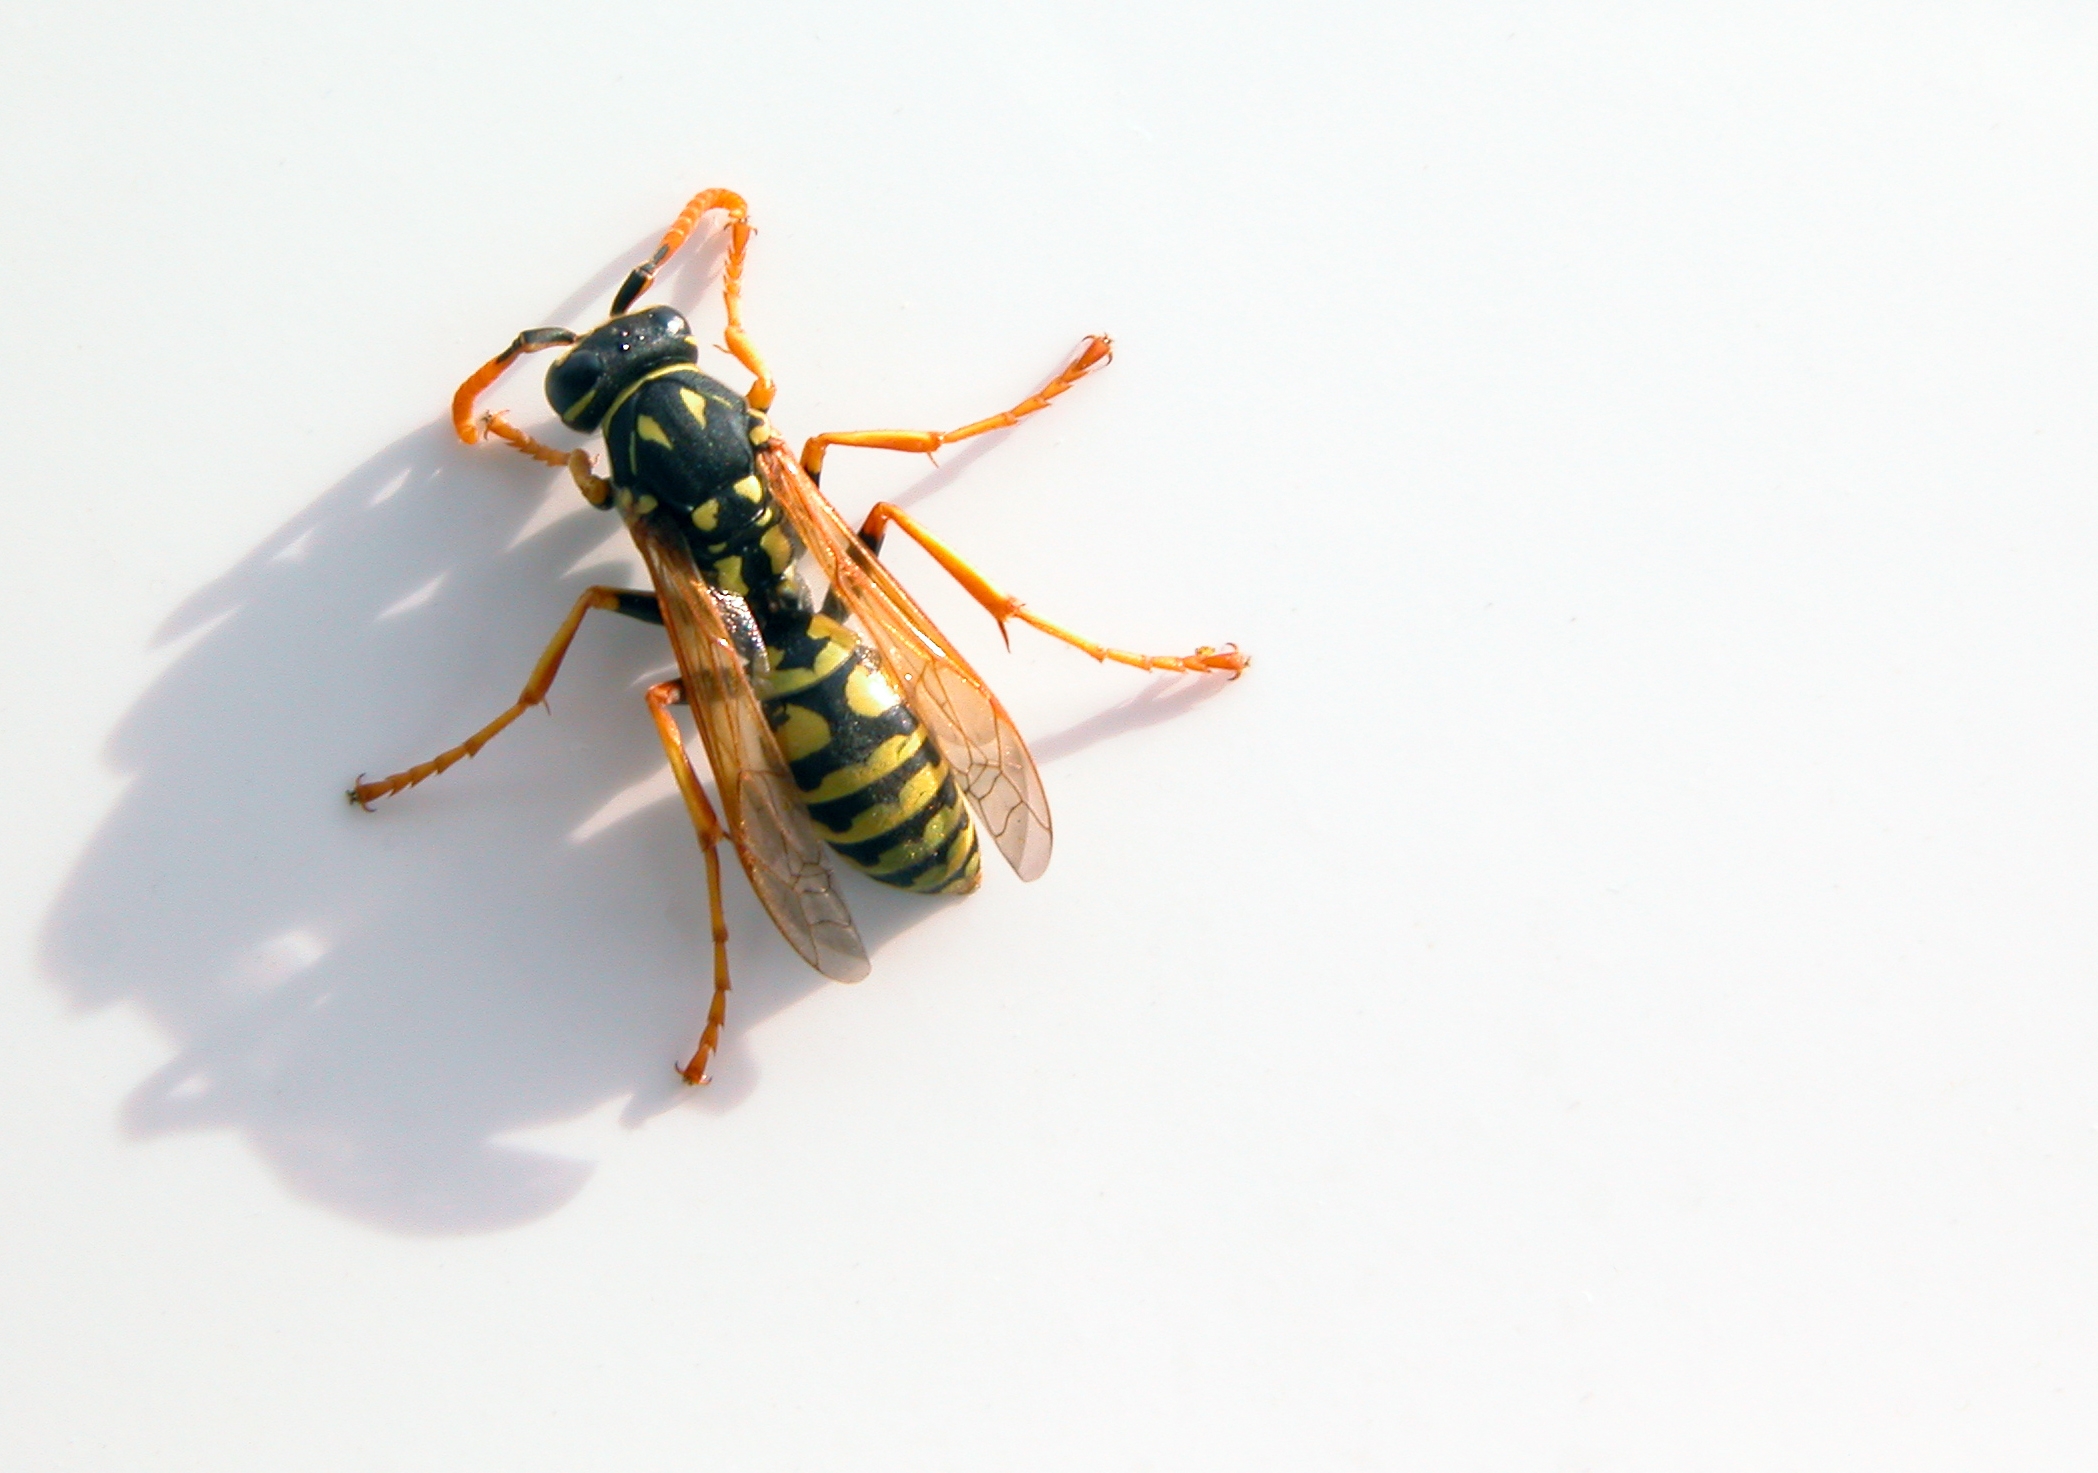 insects wasp 2098x1473 wallpaper High Quality Wallpaper